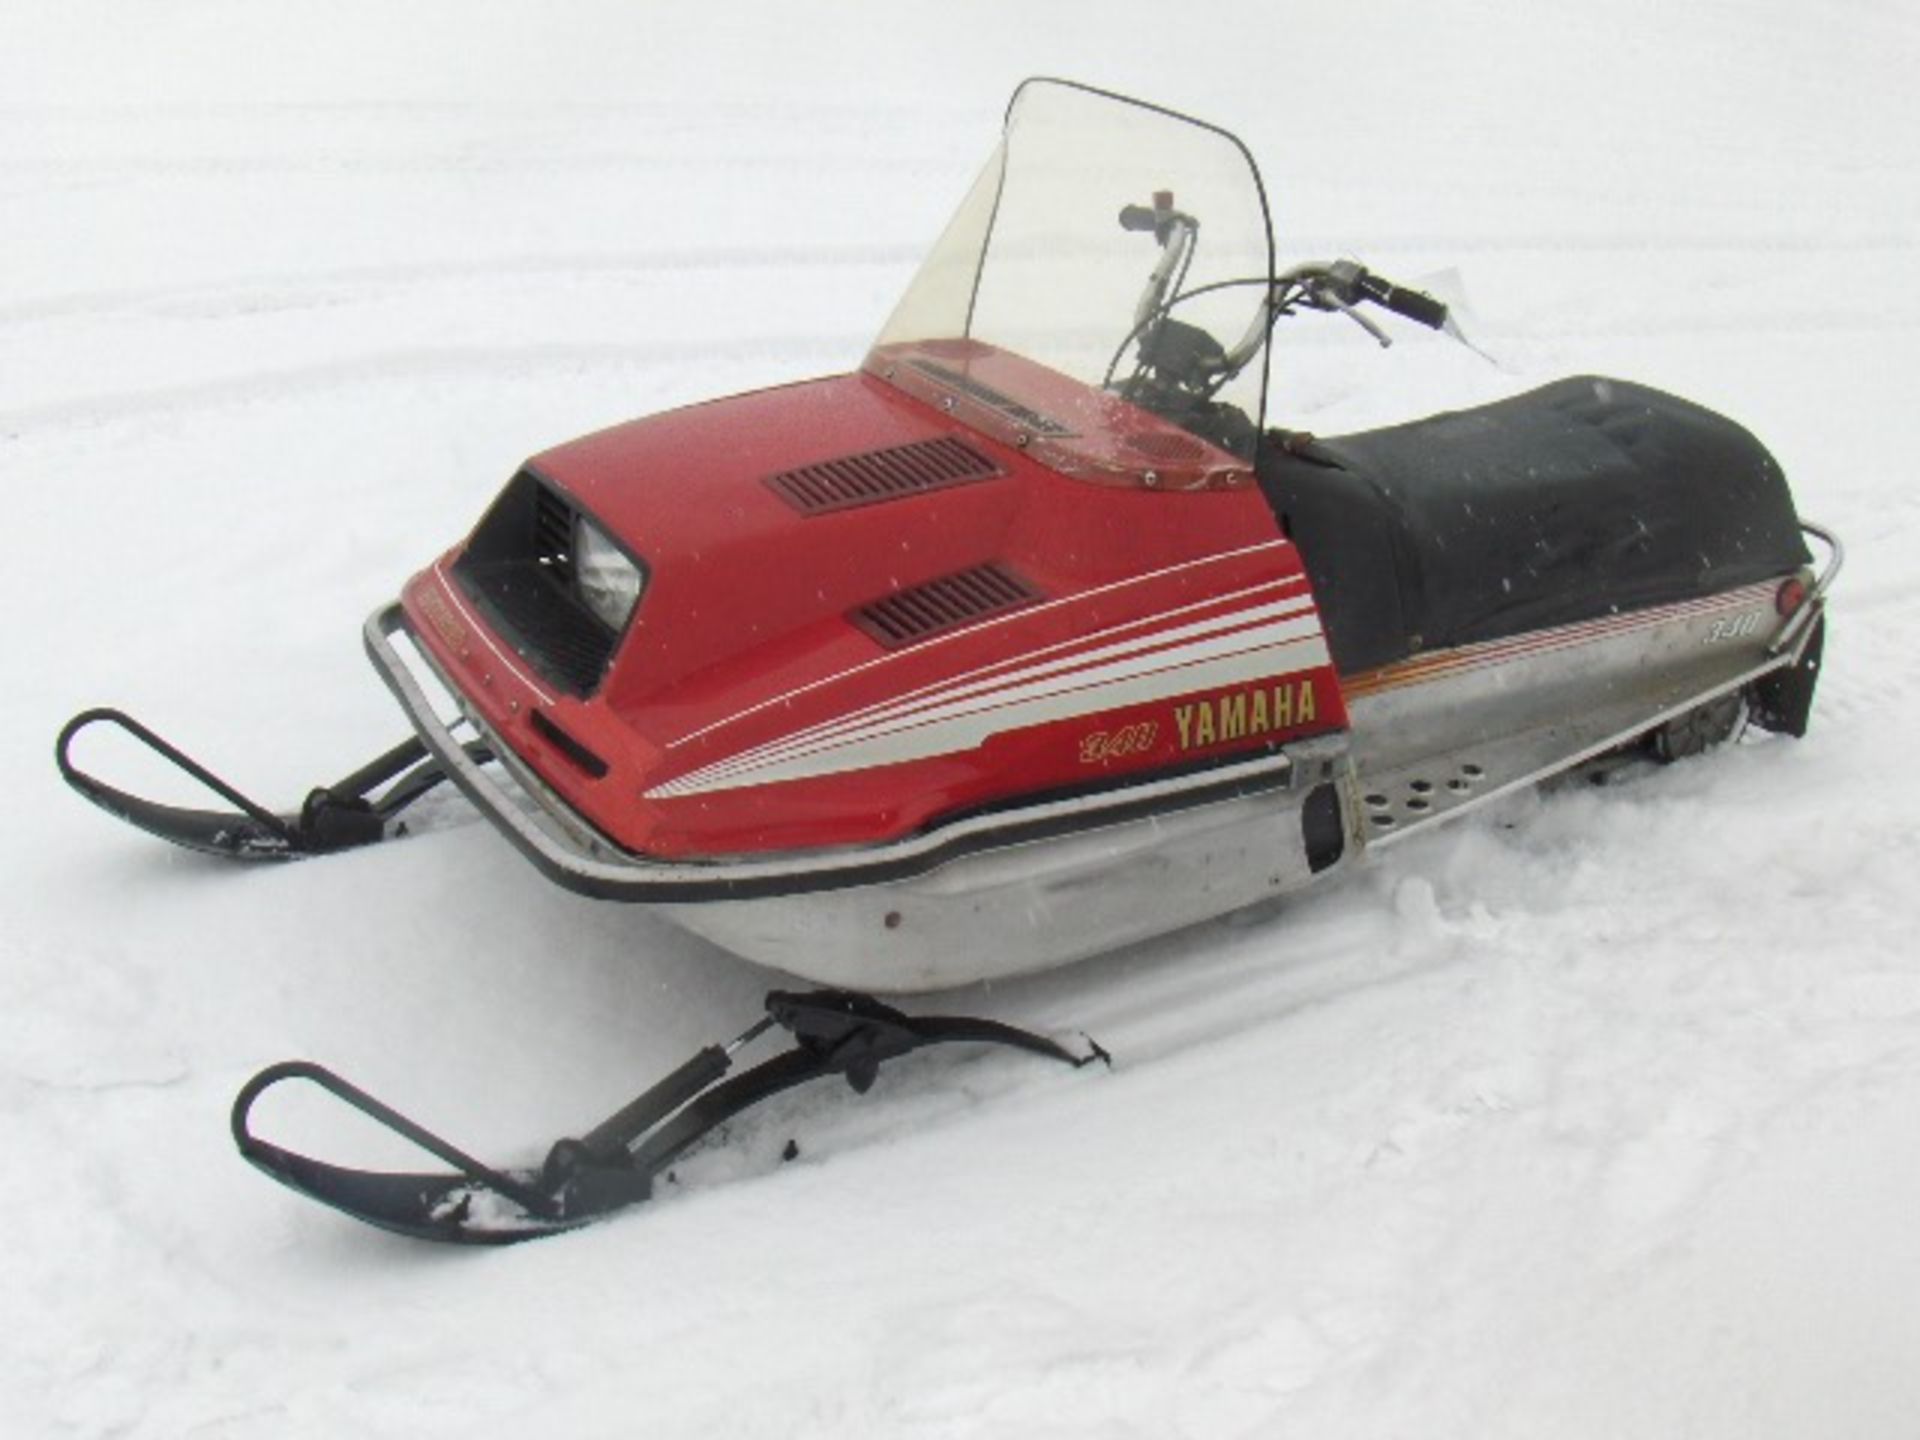 1979 YAMAHA 340 ENTICER  8H5014019 snowmobile, owner started at time of auction check in, new